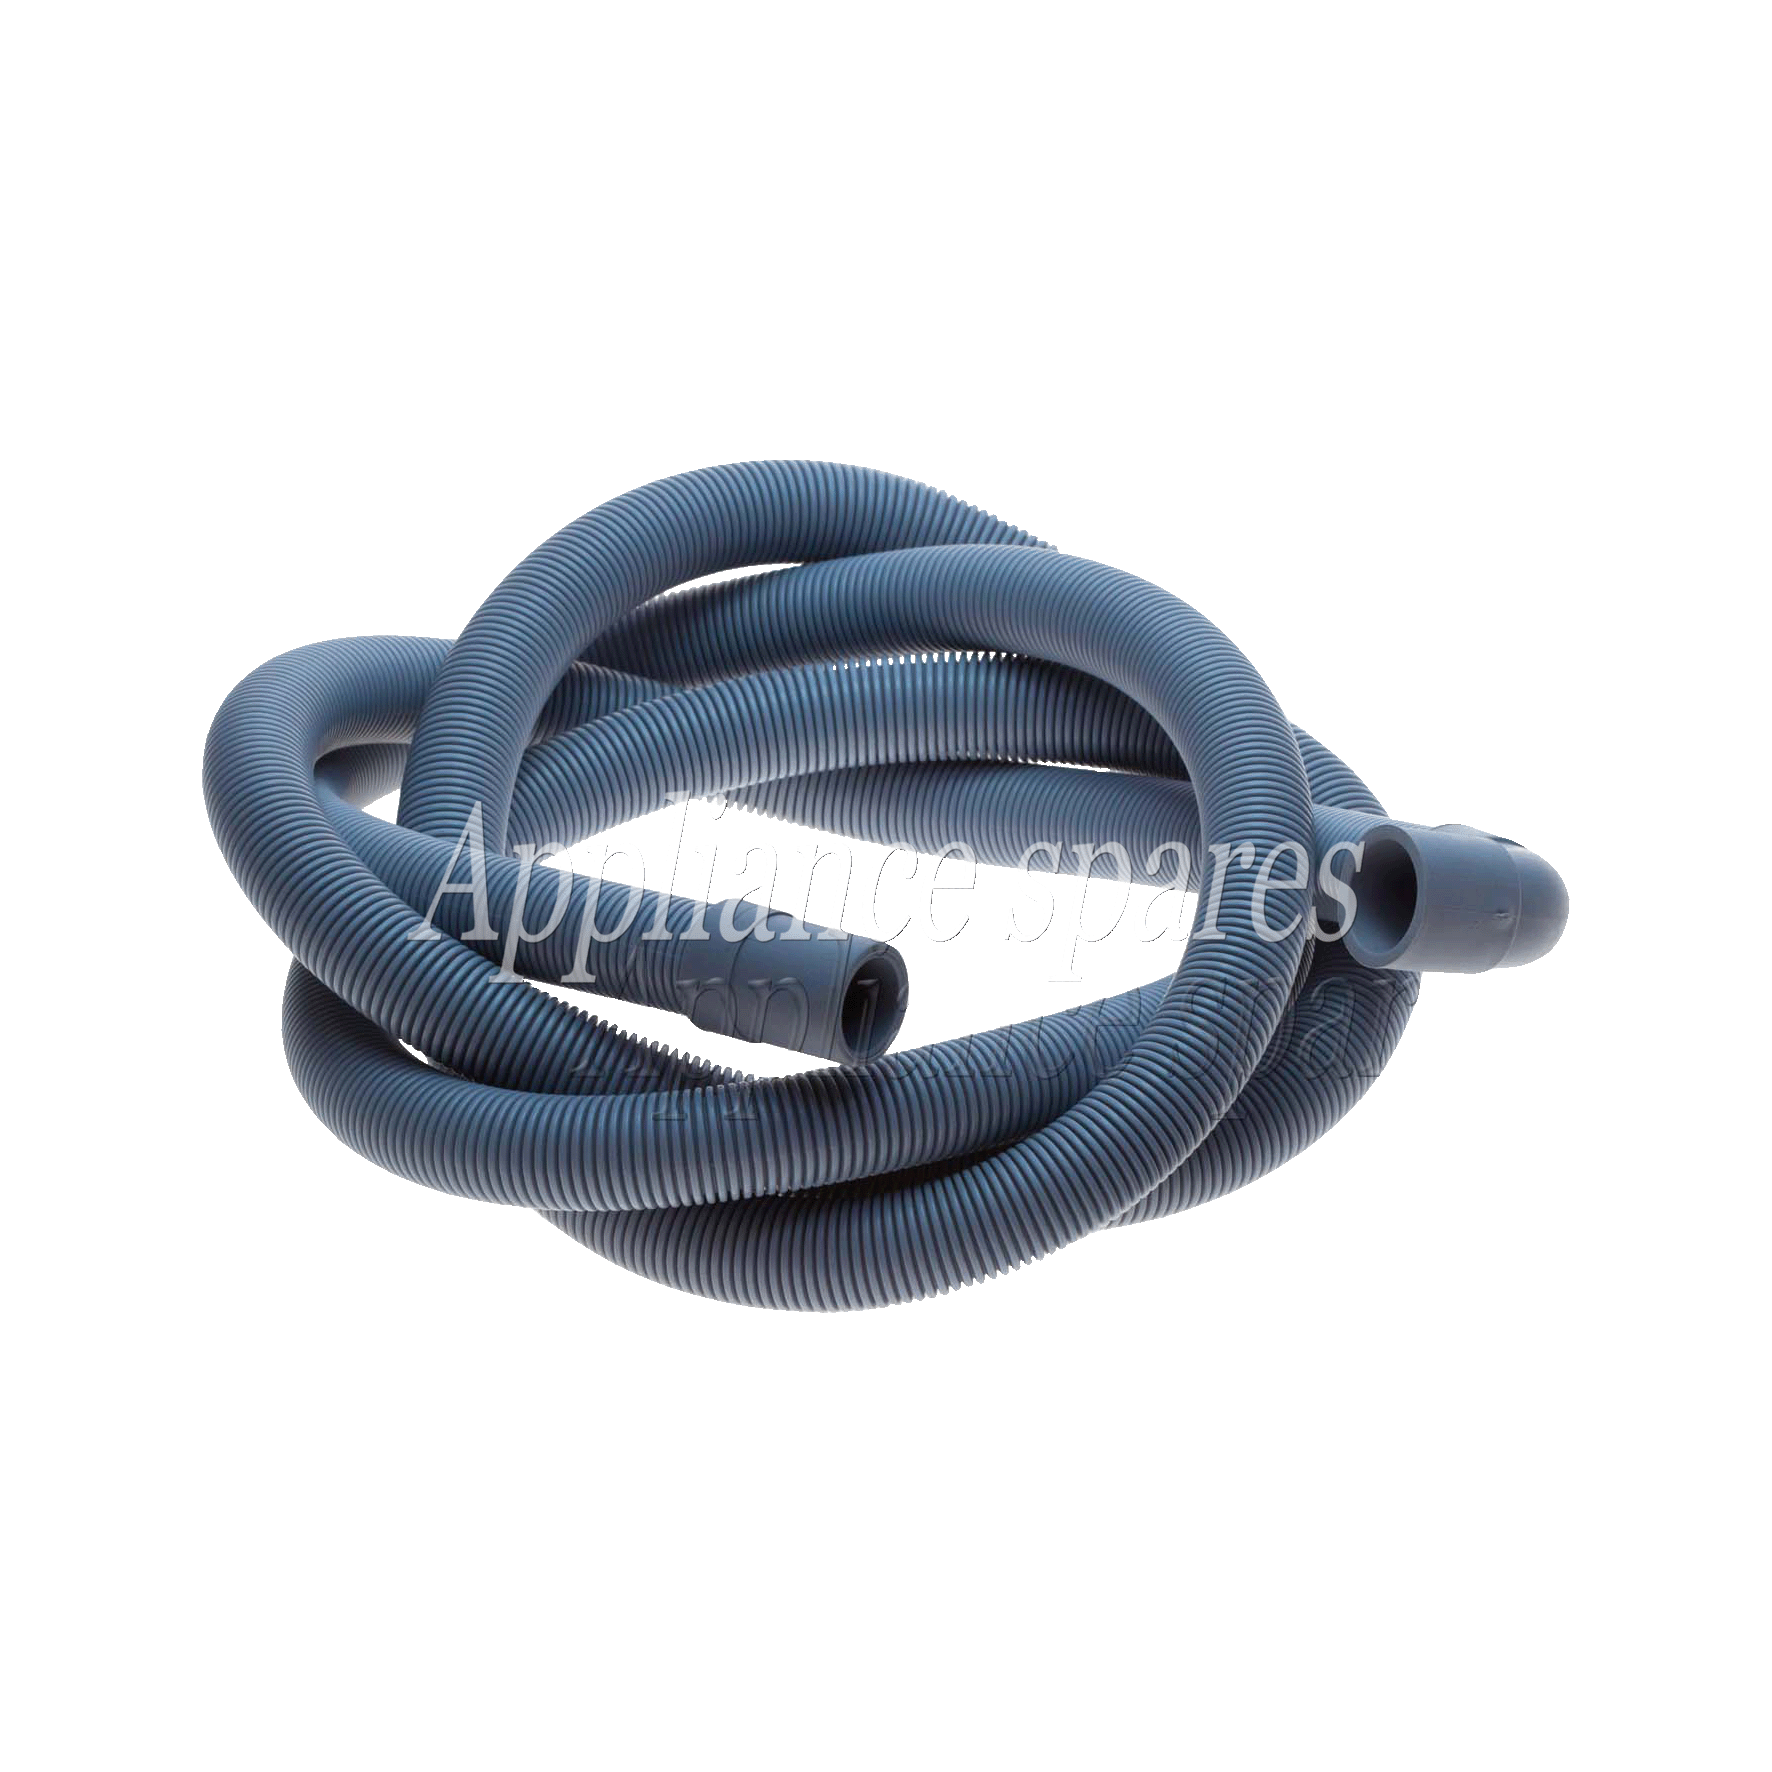 2 Meter Drain Hose, 22mm 90° End x 18mm Straight End With Hook